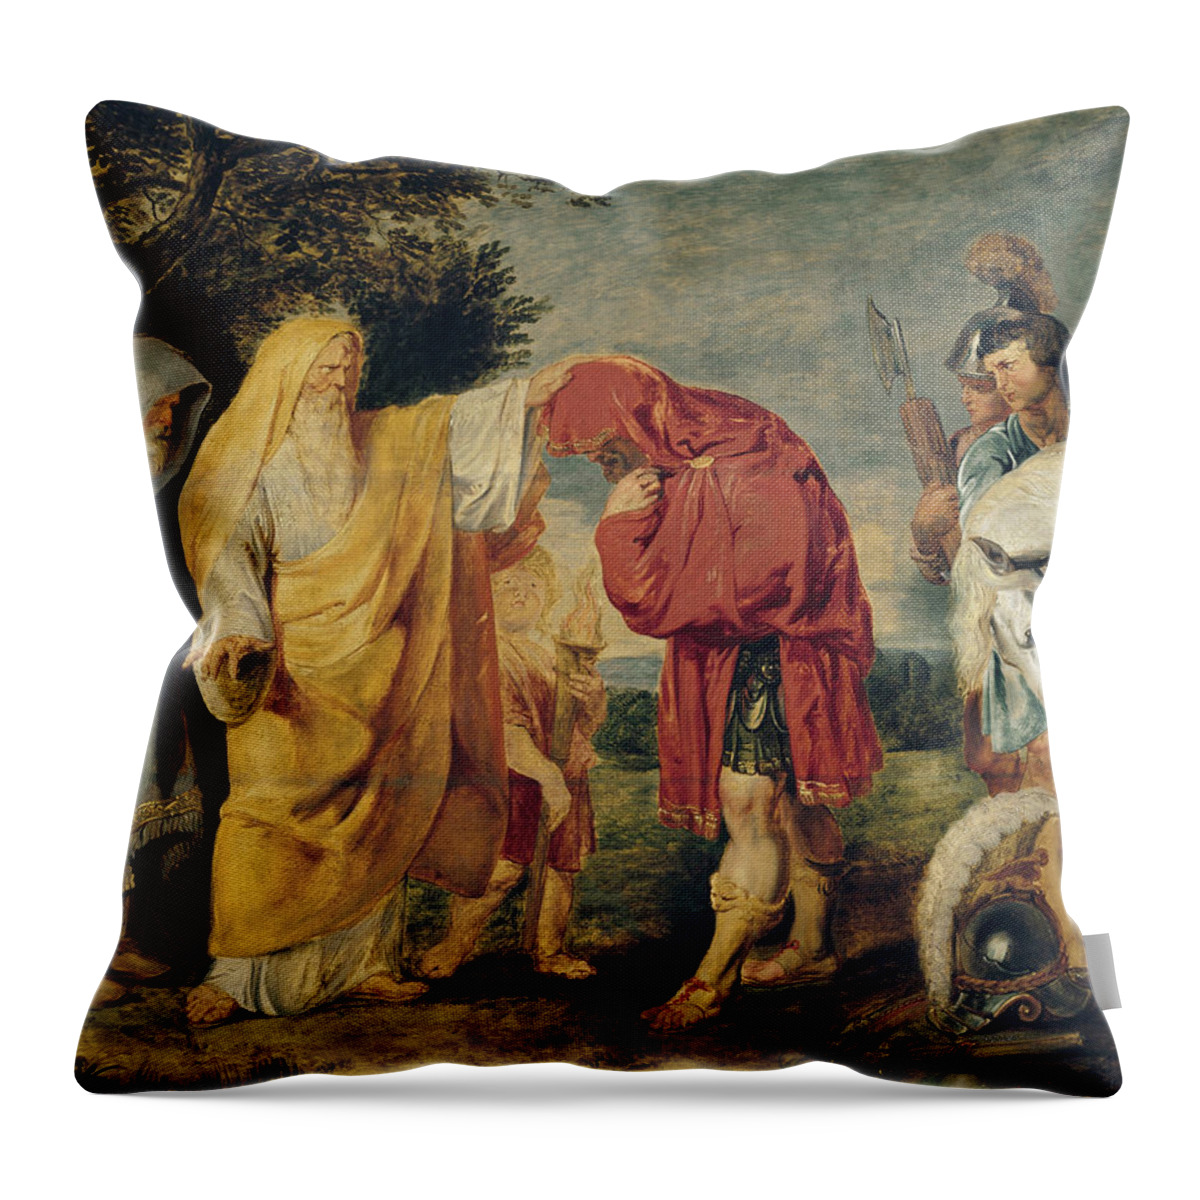 Peter Paul Rubens Throw Pillow featuring the painting The Consecration of Decius Mus by Peter Paul Rubens